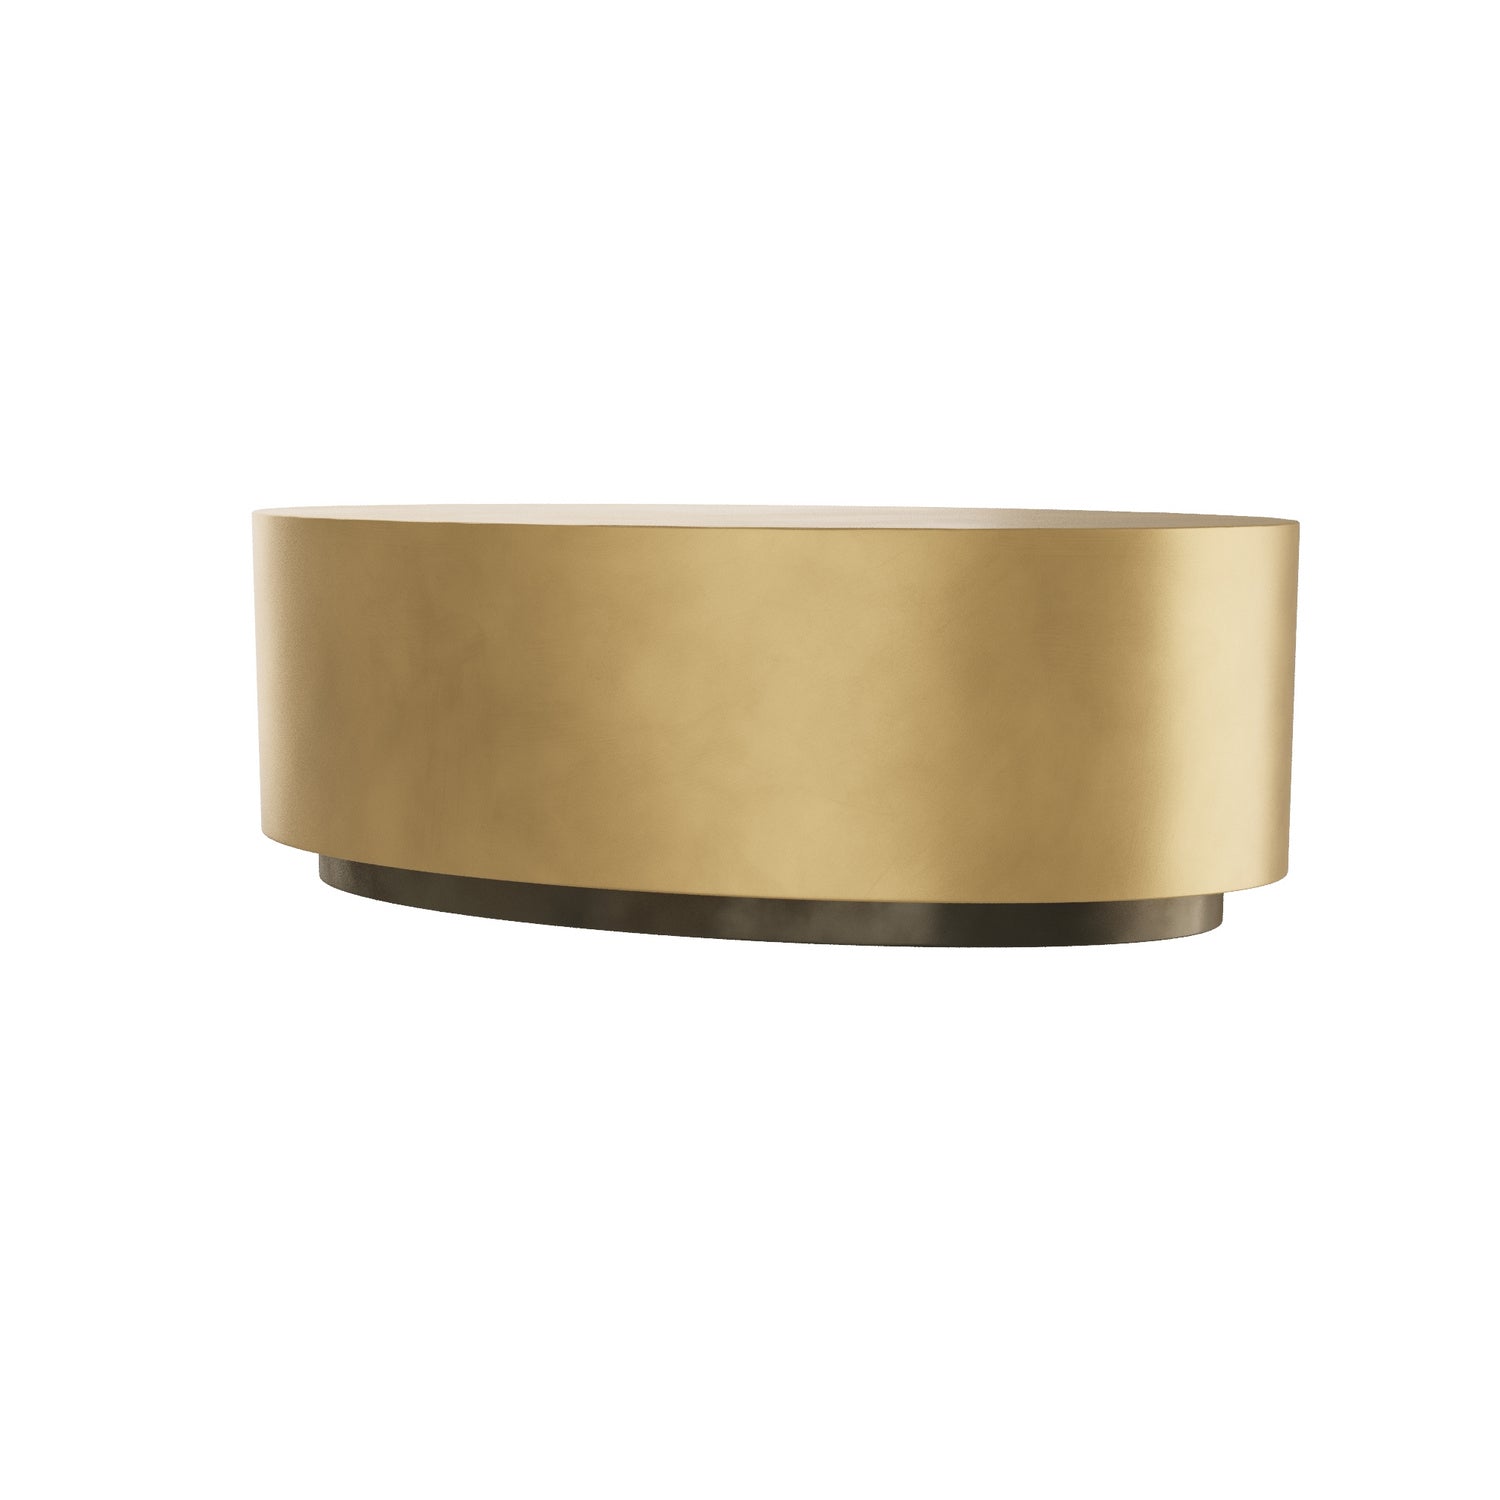 Coffee Table from the Suki collection in Antique Brass finish